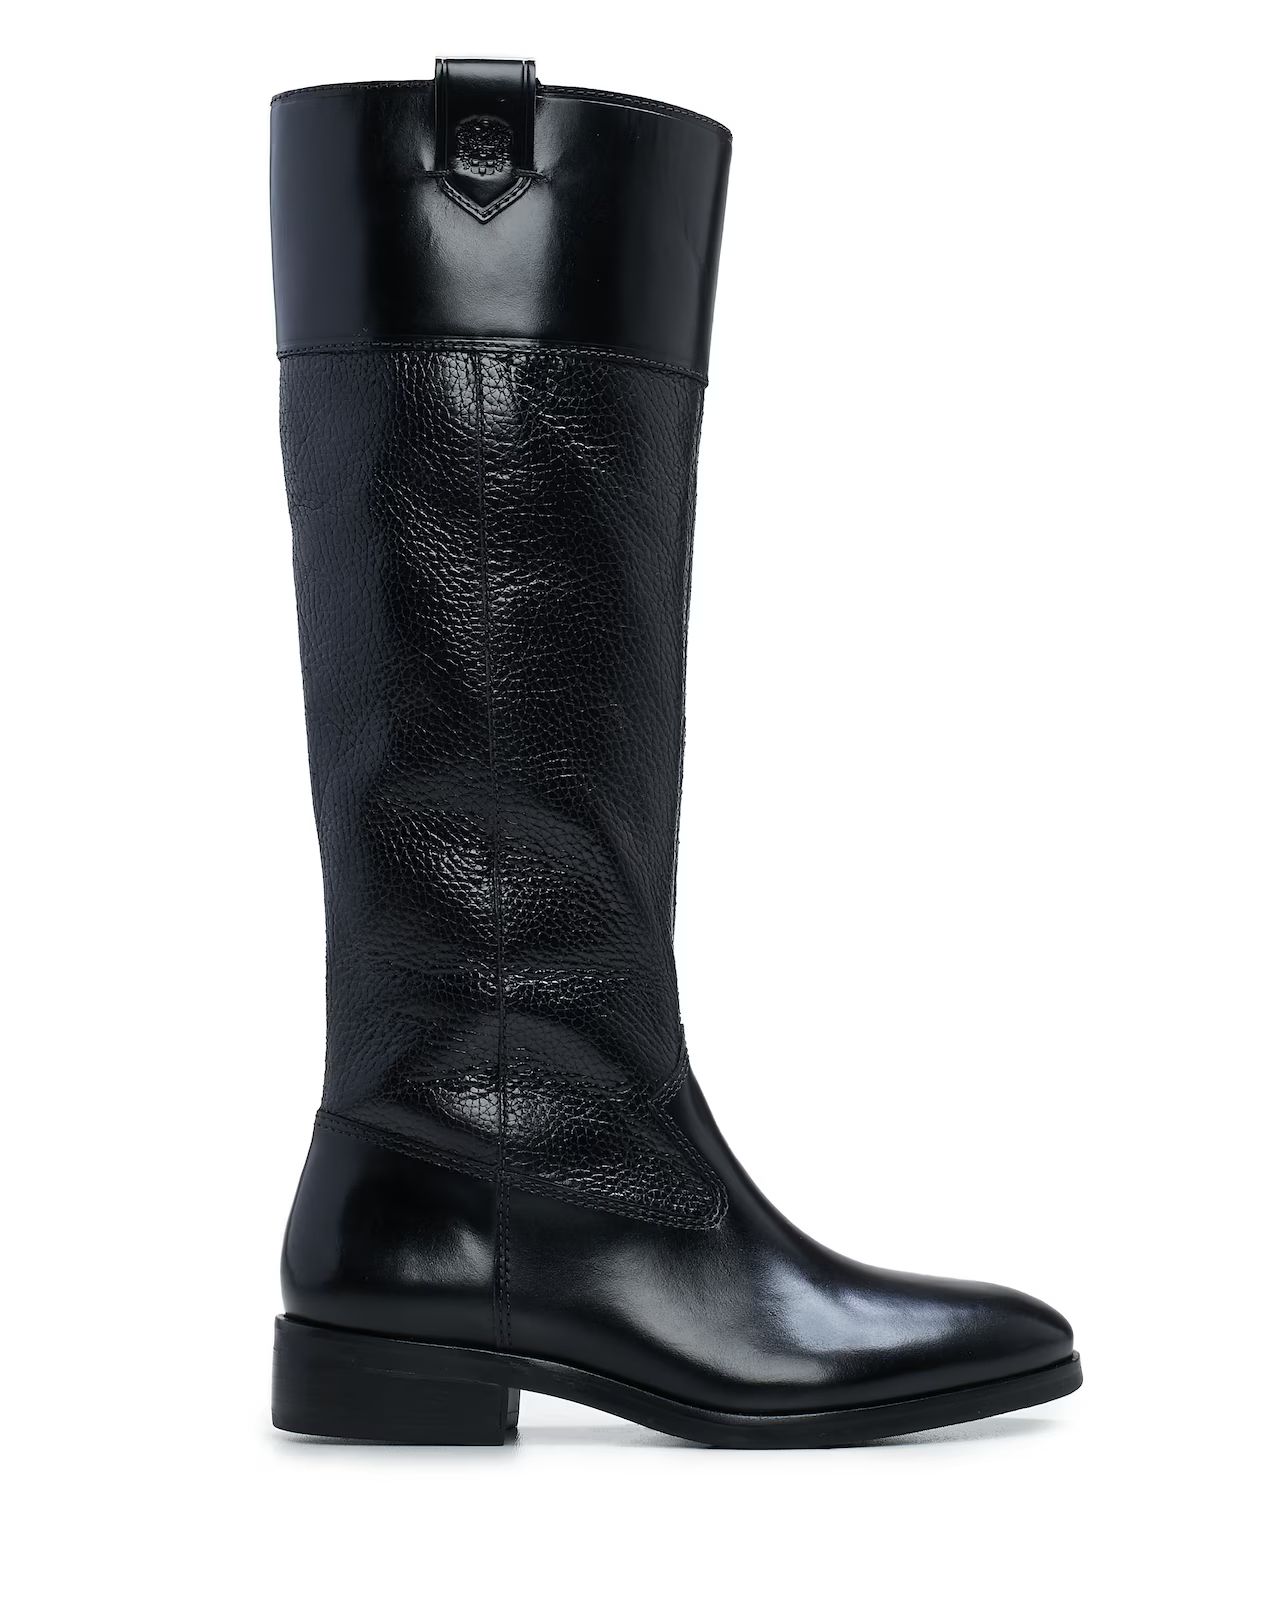 Vince Camuto Selpisa Wide-Calf Boot | Vince Camuto